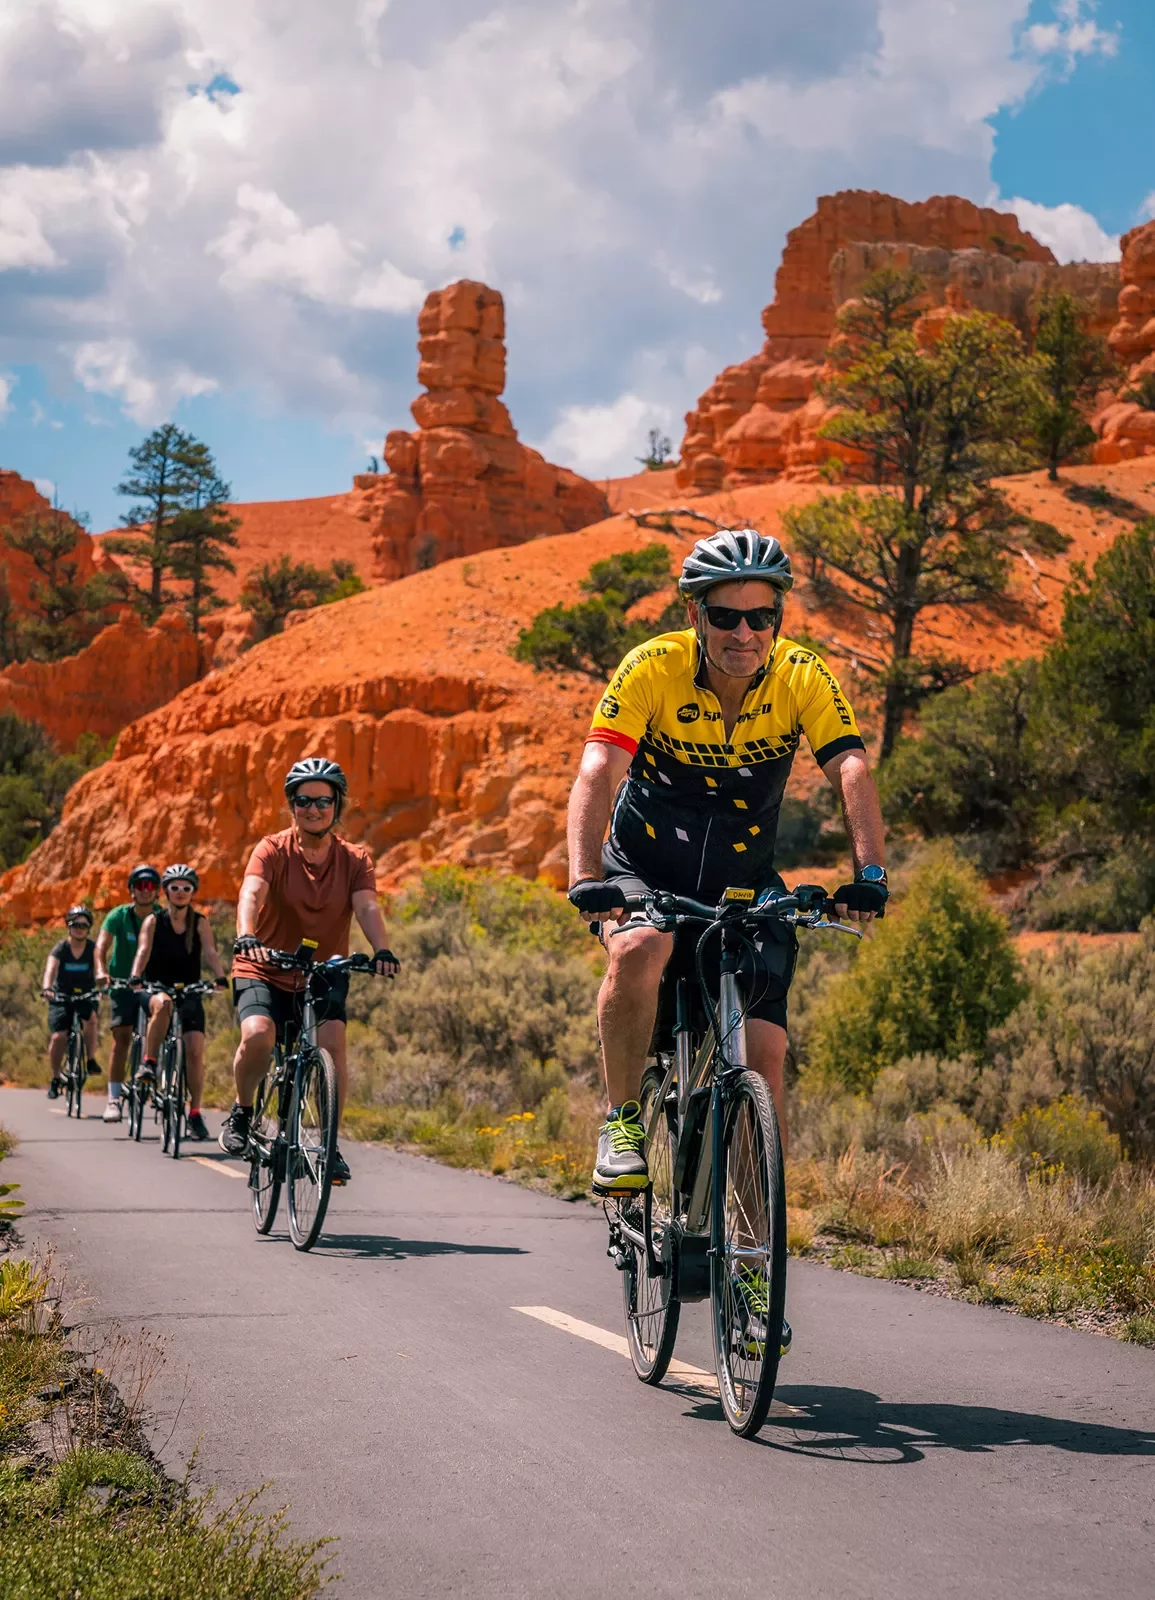 Five guests cycling towards camera, trees, vibrant red sand, hoodoos behind them.